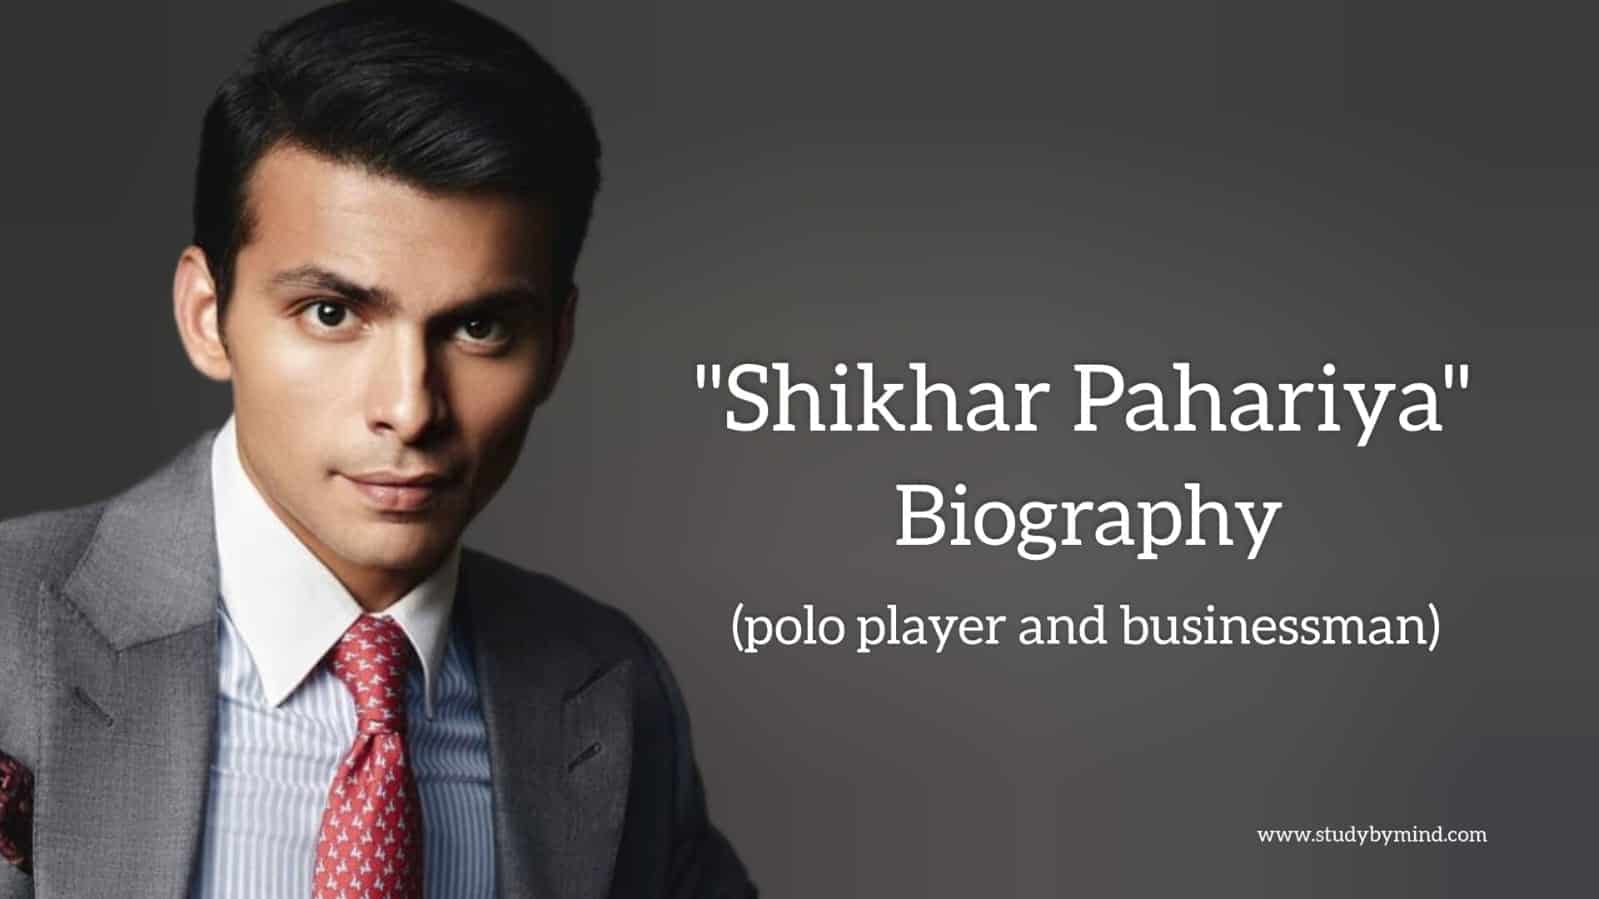 You are currently viewing Shikhar pahariya biography in english (polo player)